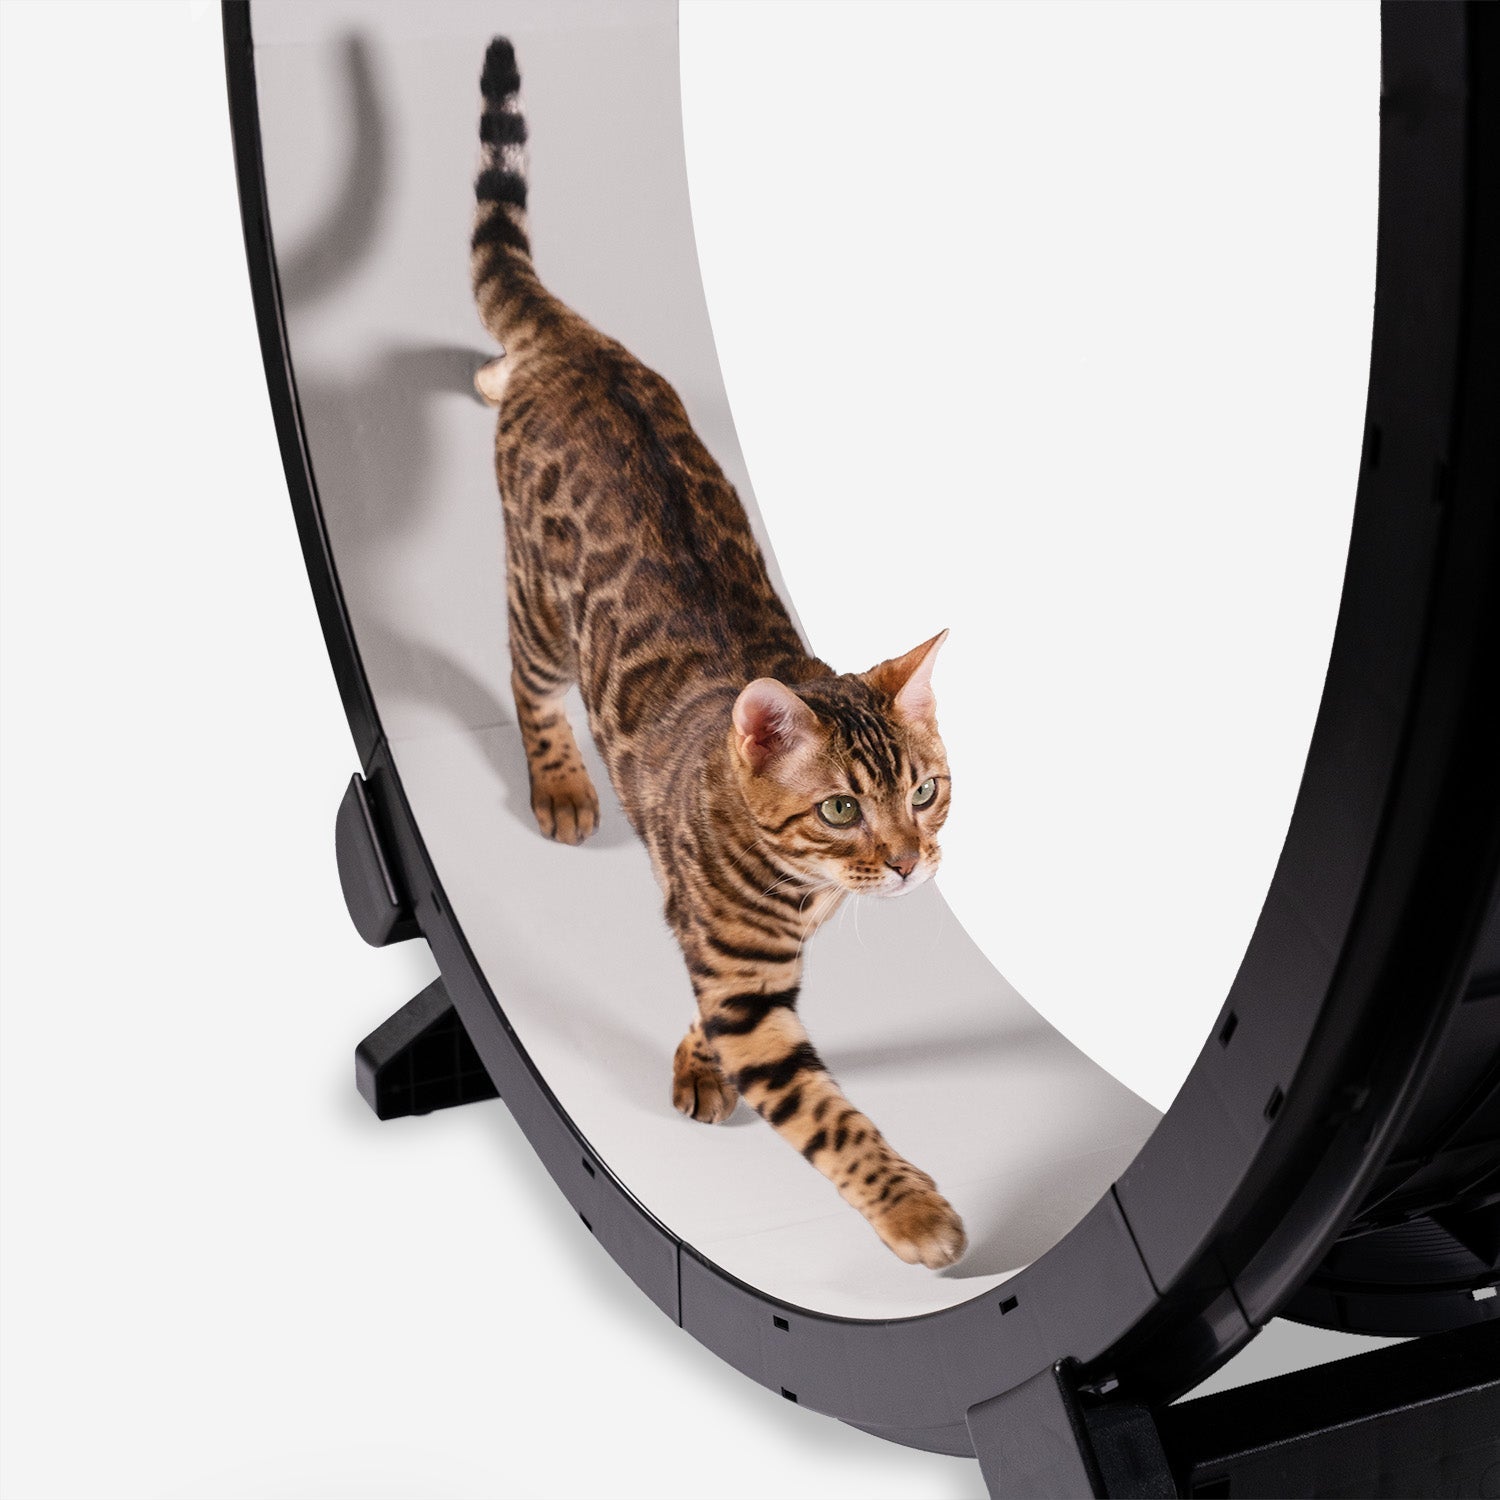 linor 5 in 1 Cat Wheel, Cat Exercise Wheel with 2 Anti-Scratch